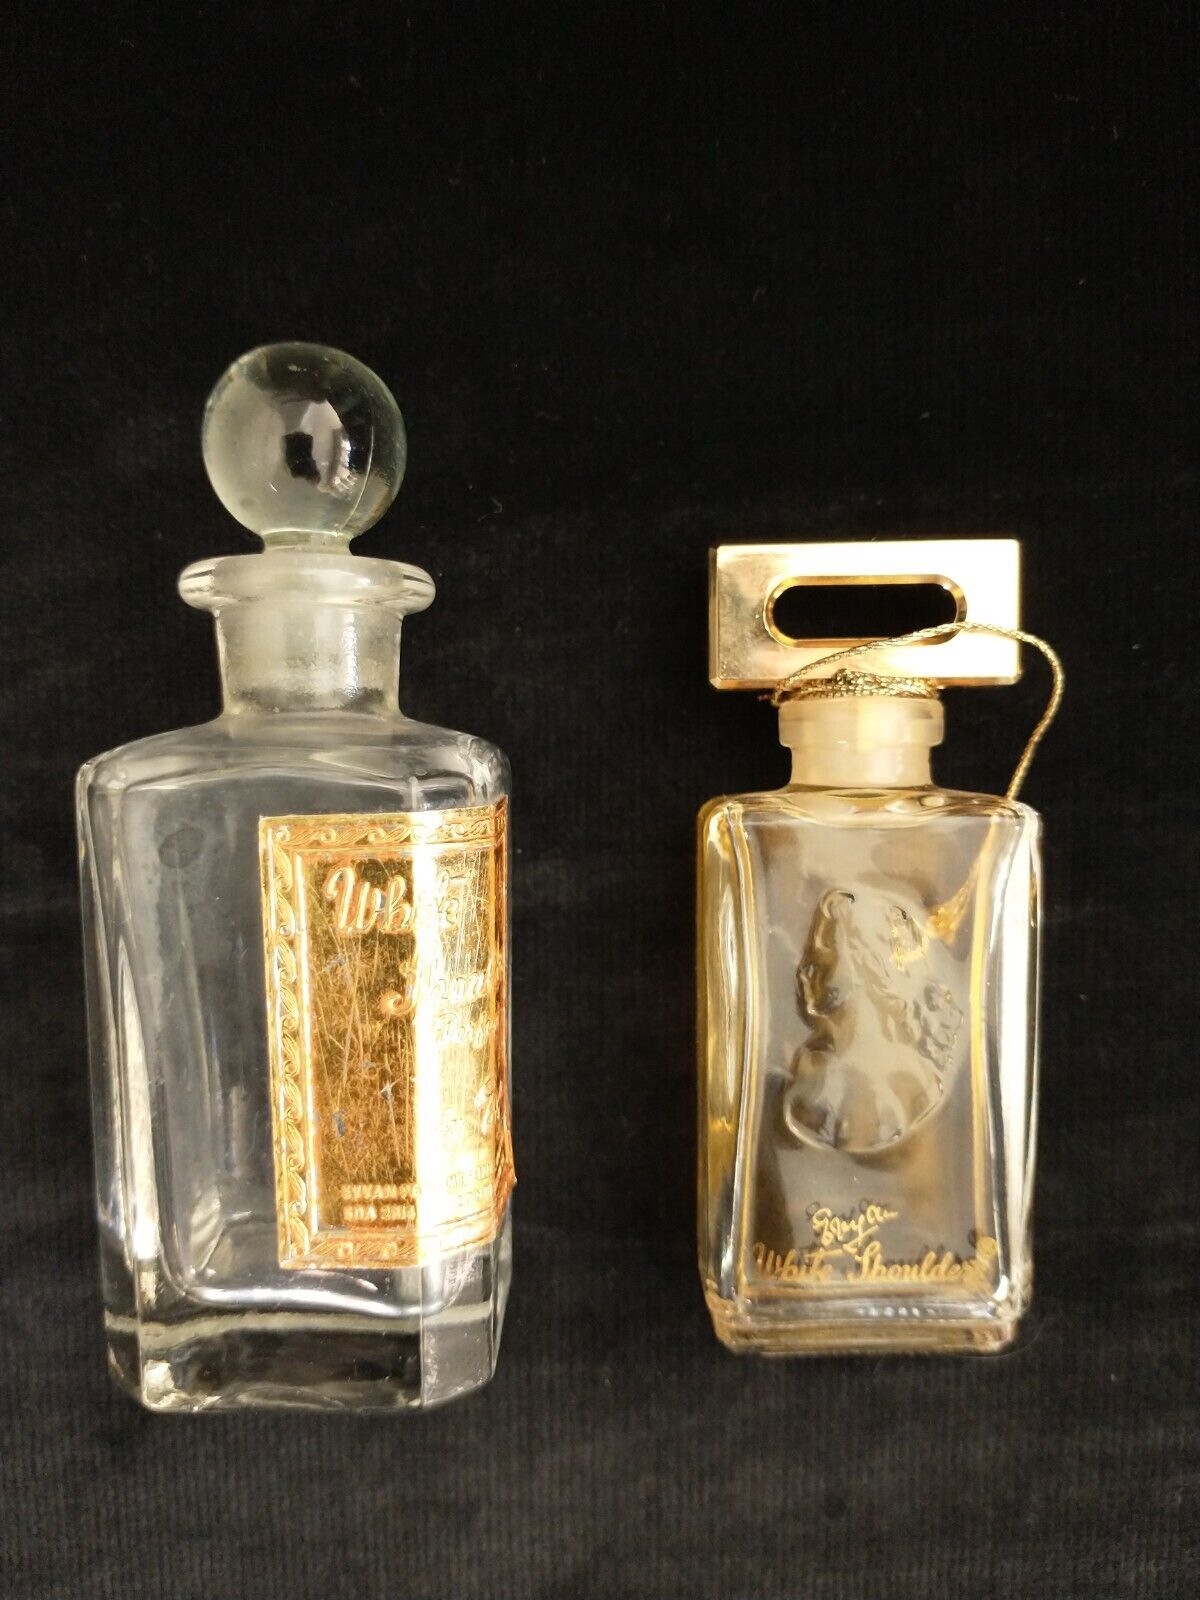 Vintage White Shoulders By Evyan Lot Of Two Hard To Find Perfume Bottles